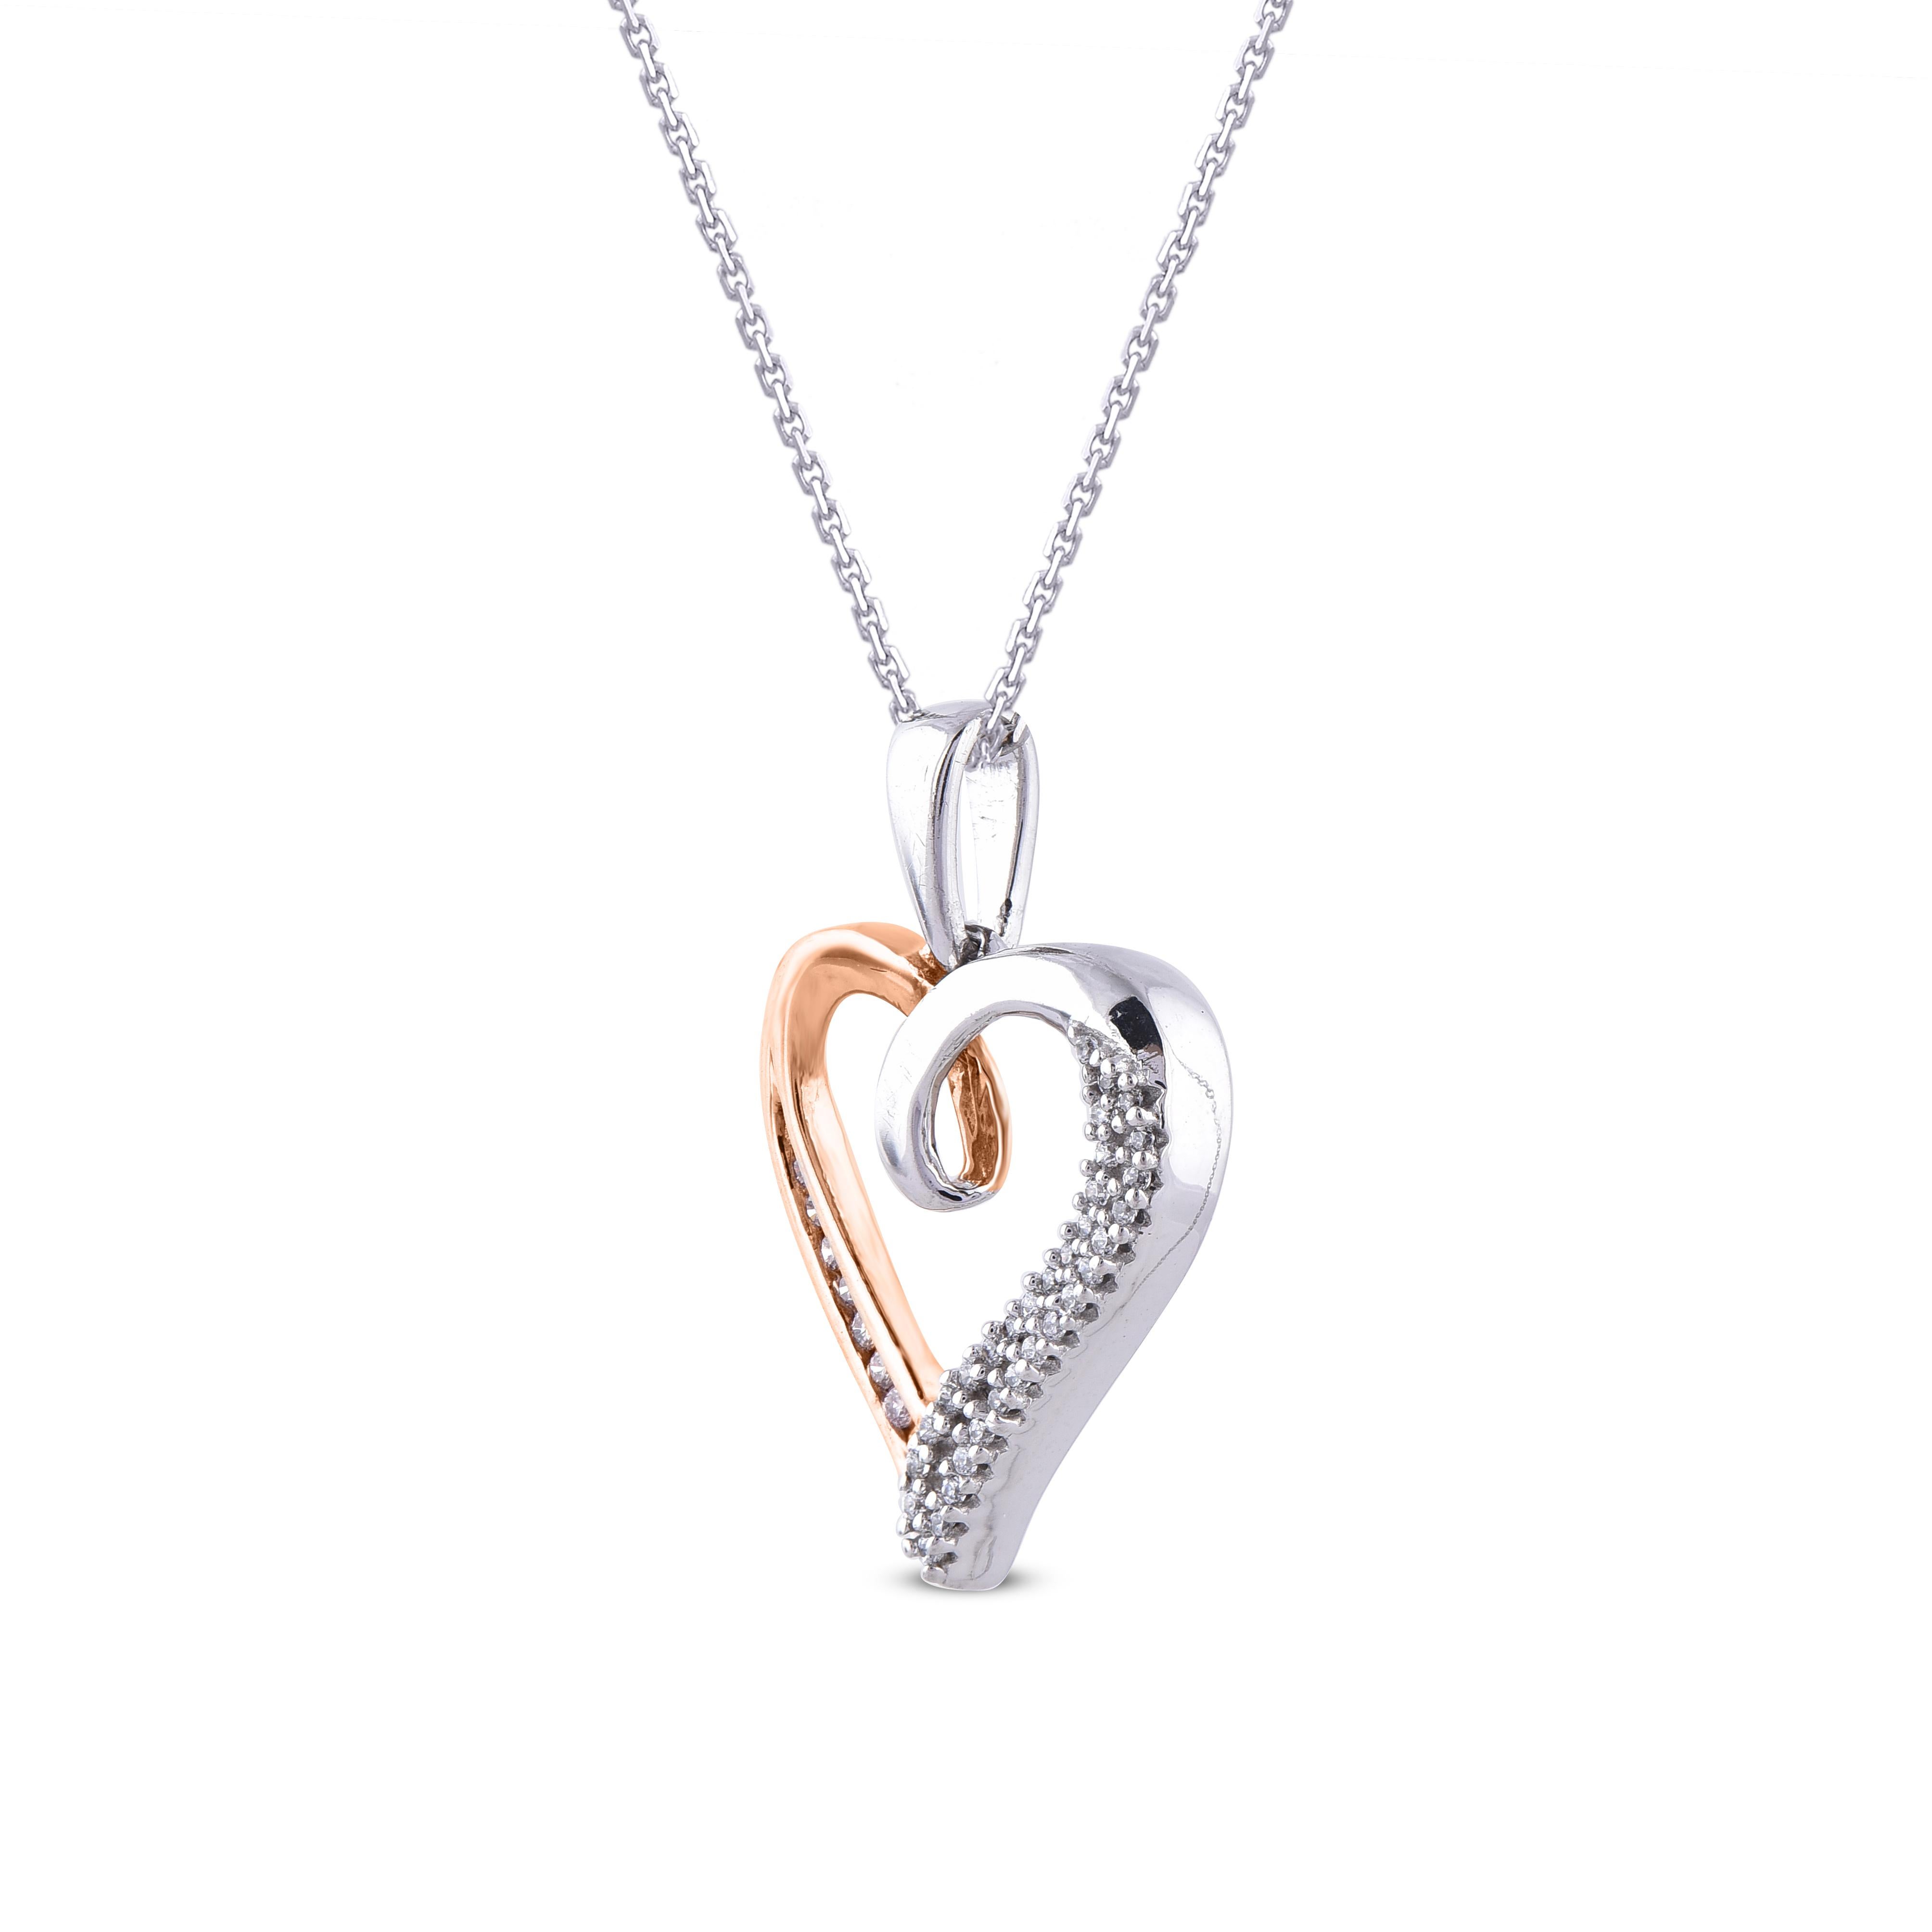 This pendant dazzles with a 32 round and 9 pink diamonds set in channel and prong setting, this 18K white gold heart pendant is a lovely way to take her by surprise. The diamonds are natural, not-treated and conflict-free with H-I color and I1